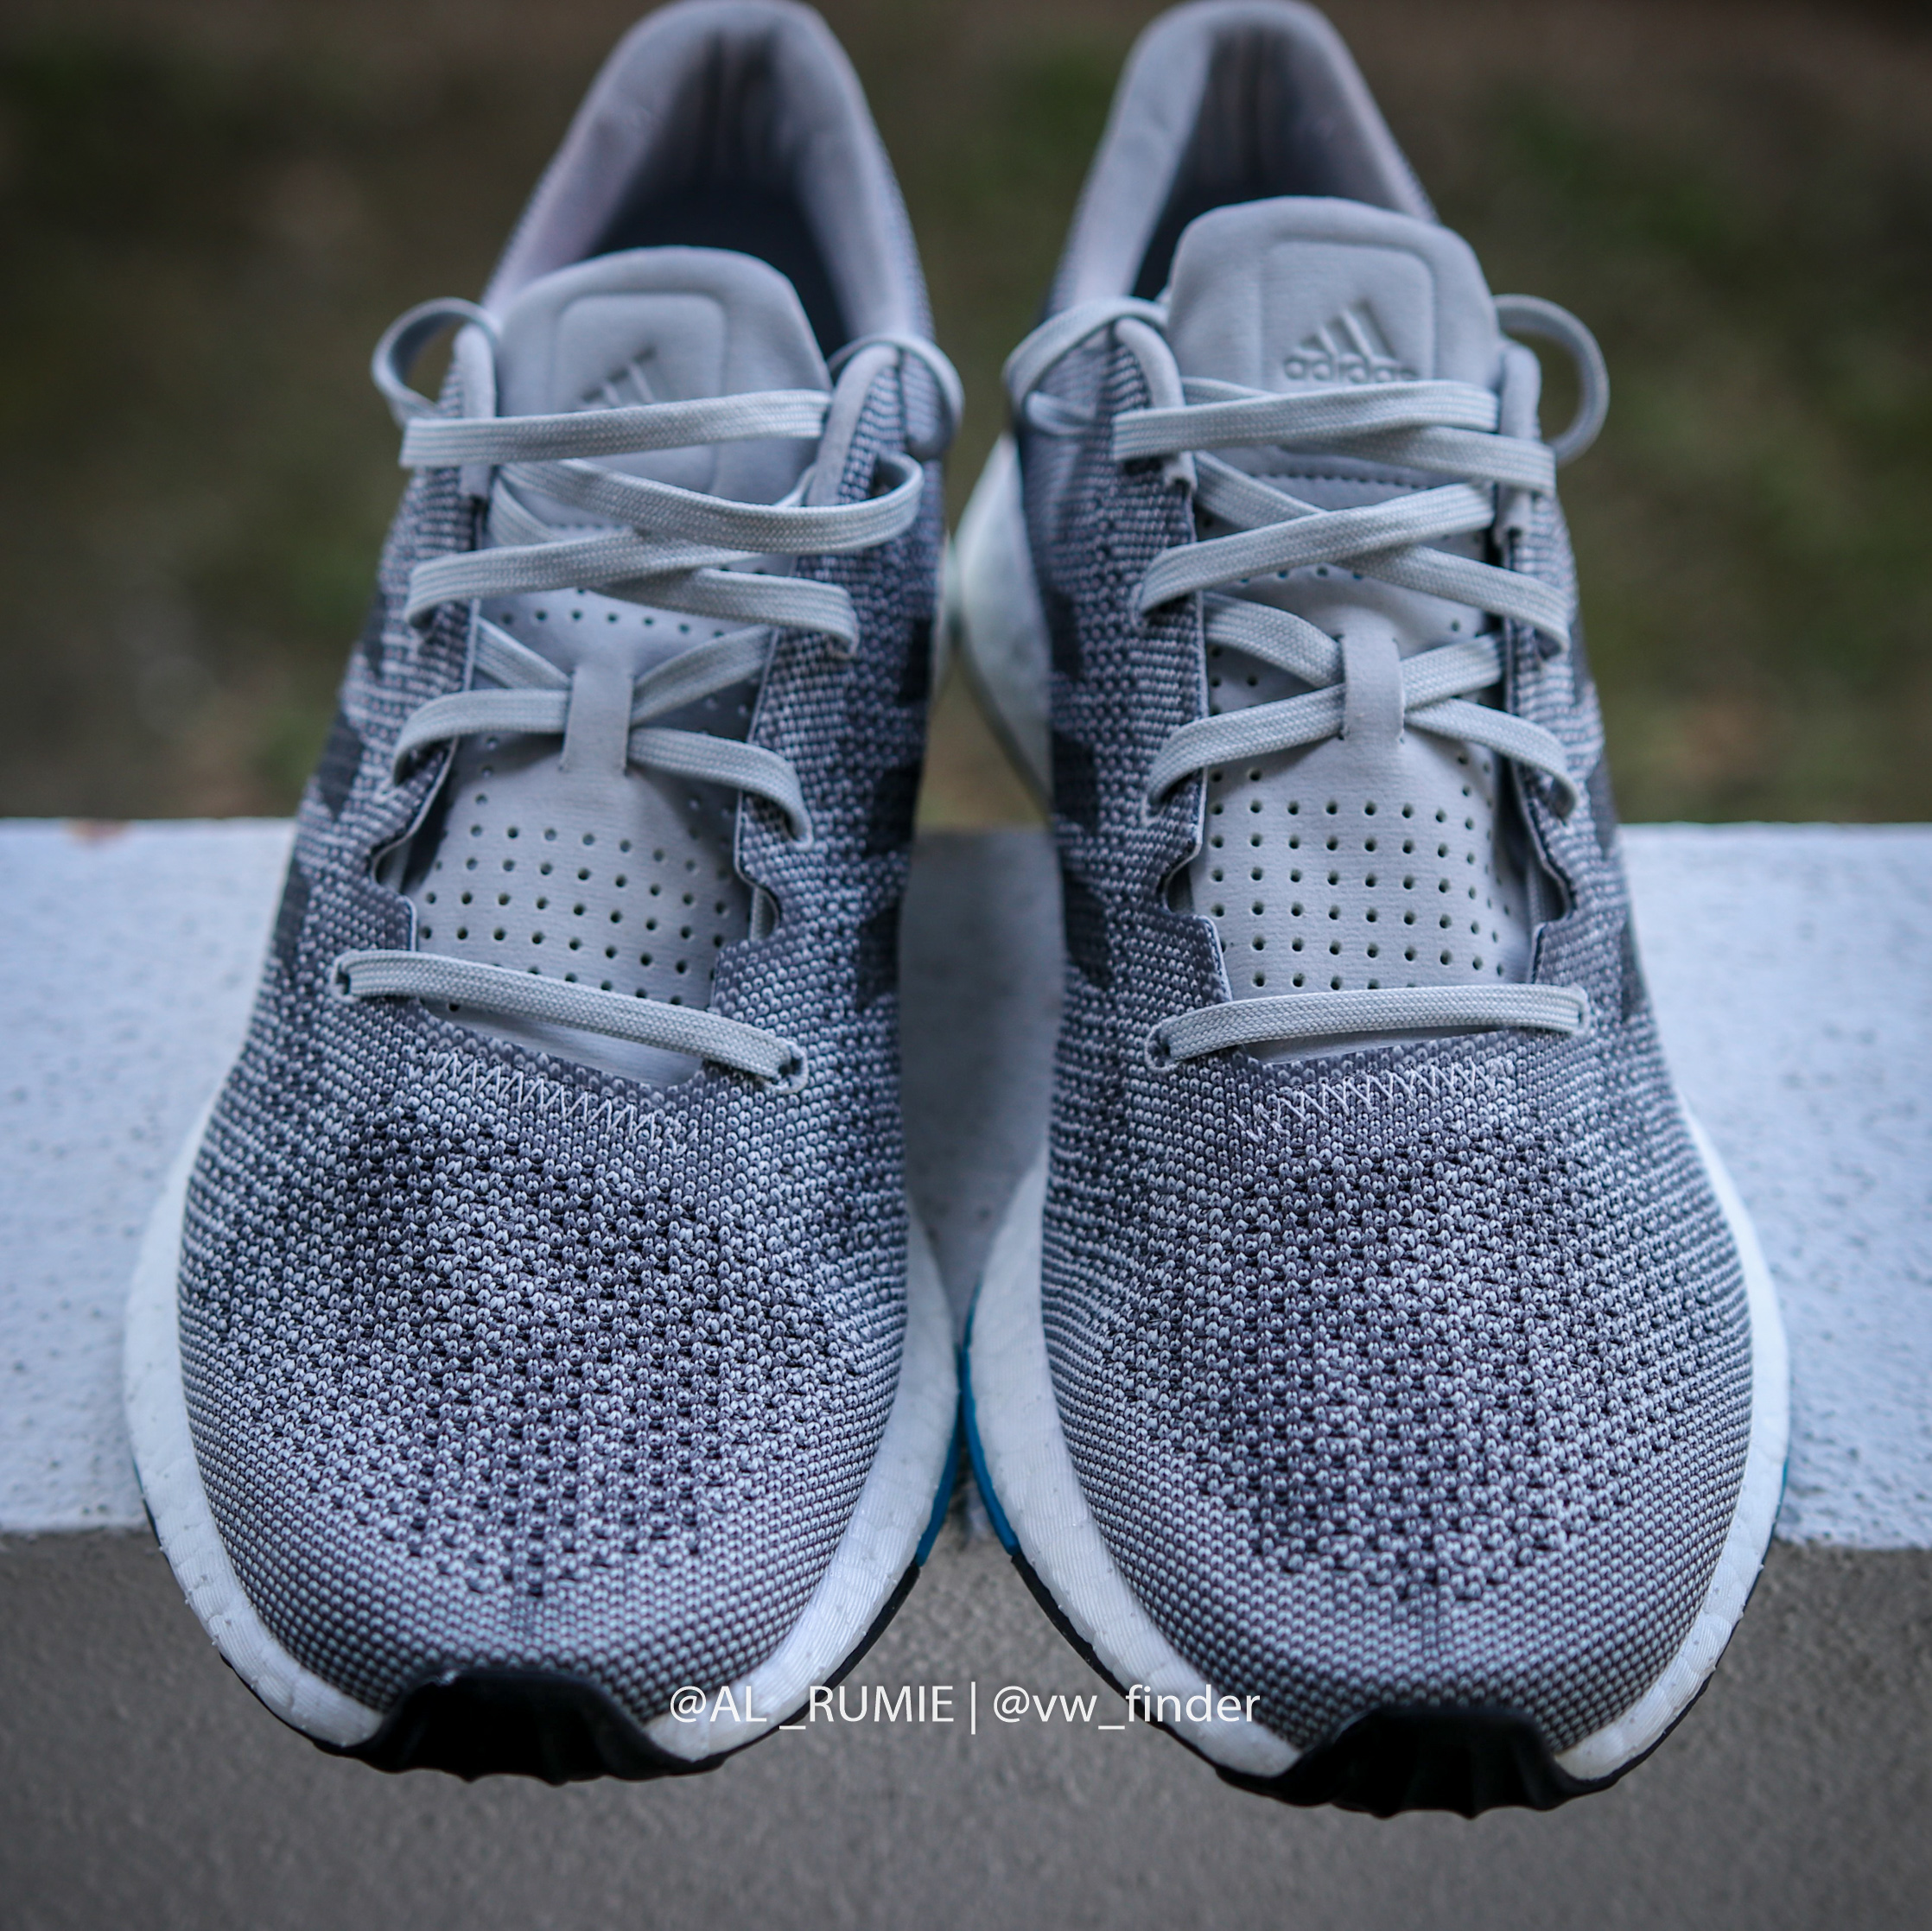 adidas dpr pure boost review